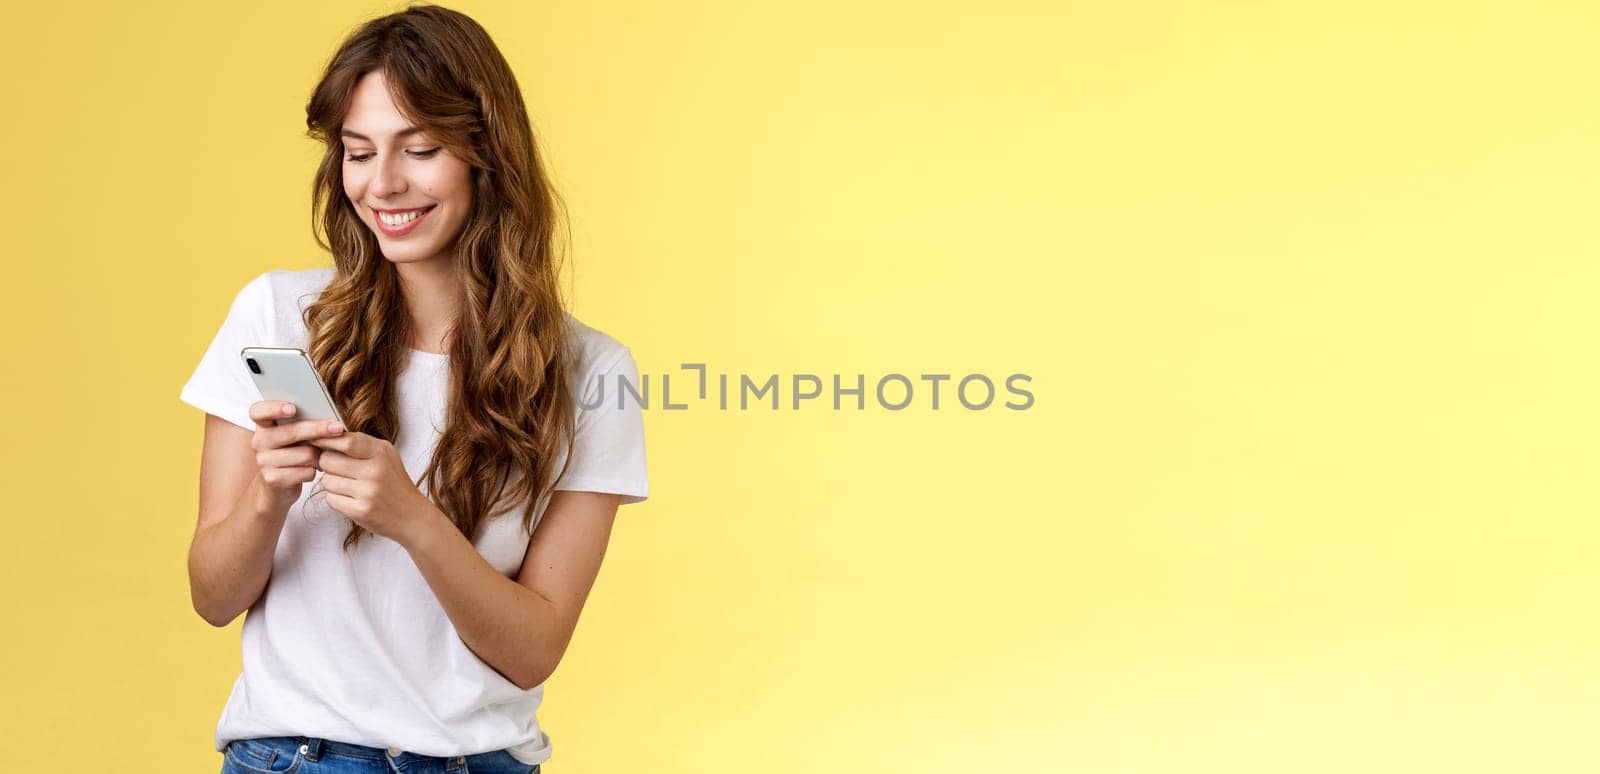 Cheerful lovely girlfriend texting friend pleased cute smile tap smartphone screen smiling broadly look mobile phone display tenderly writing post contemplate touching photo yellow background.